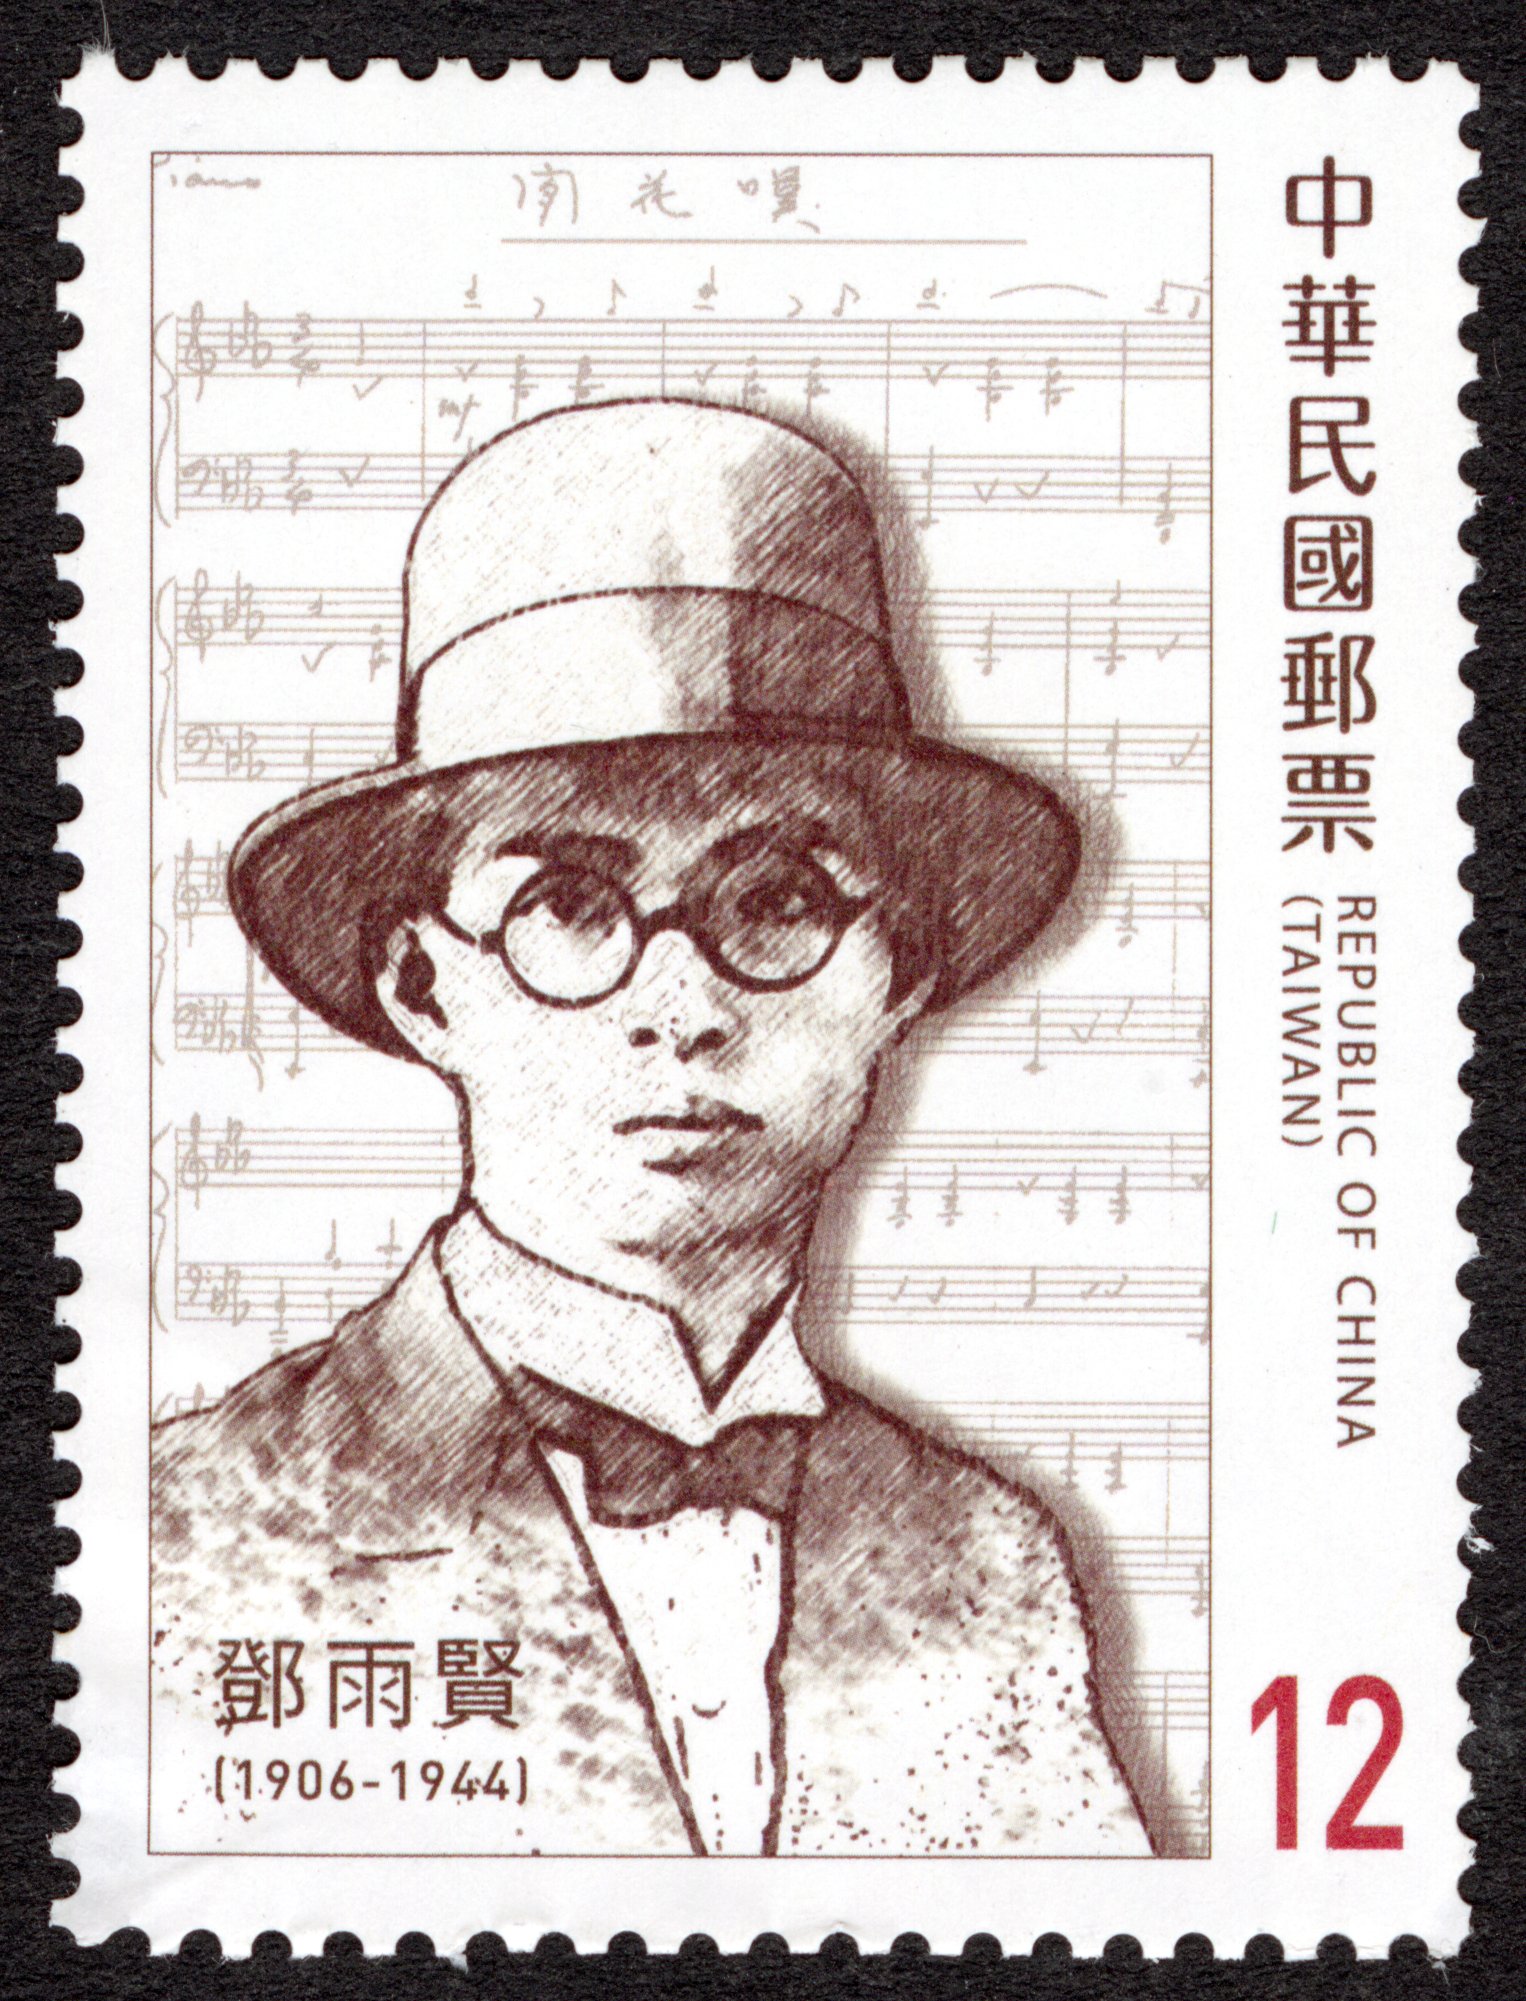 Sp.723 Taiwan's Modern Composers Postage Stamps